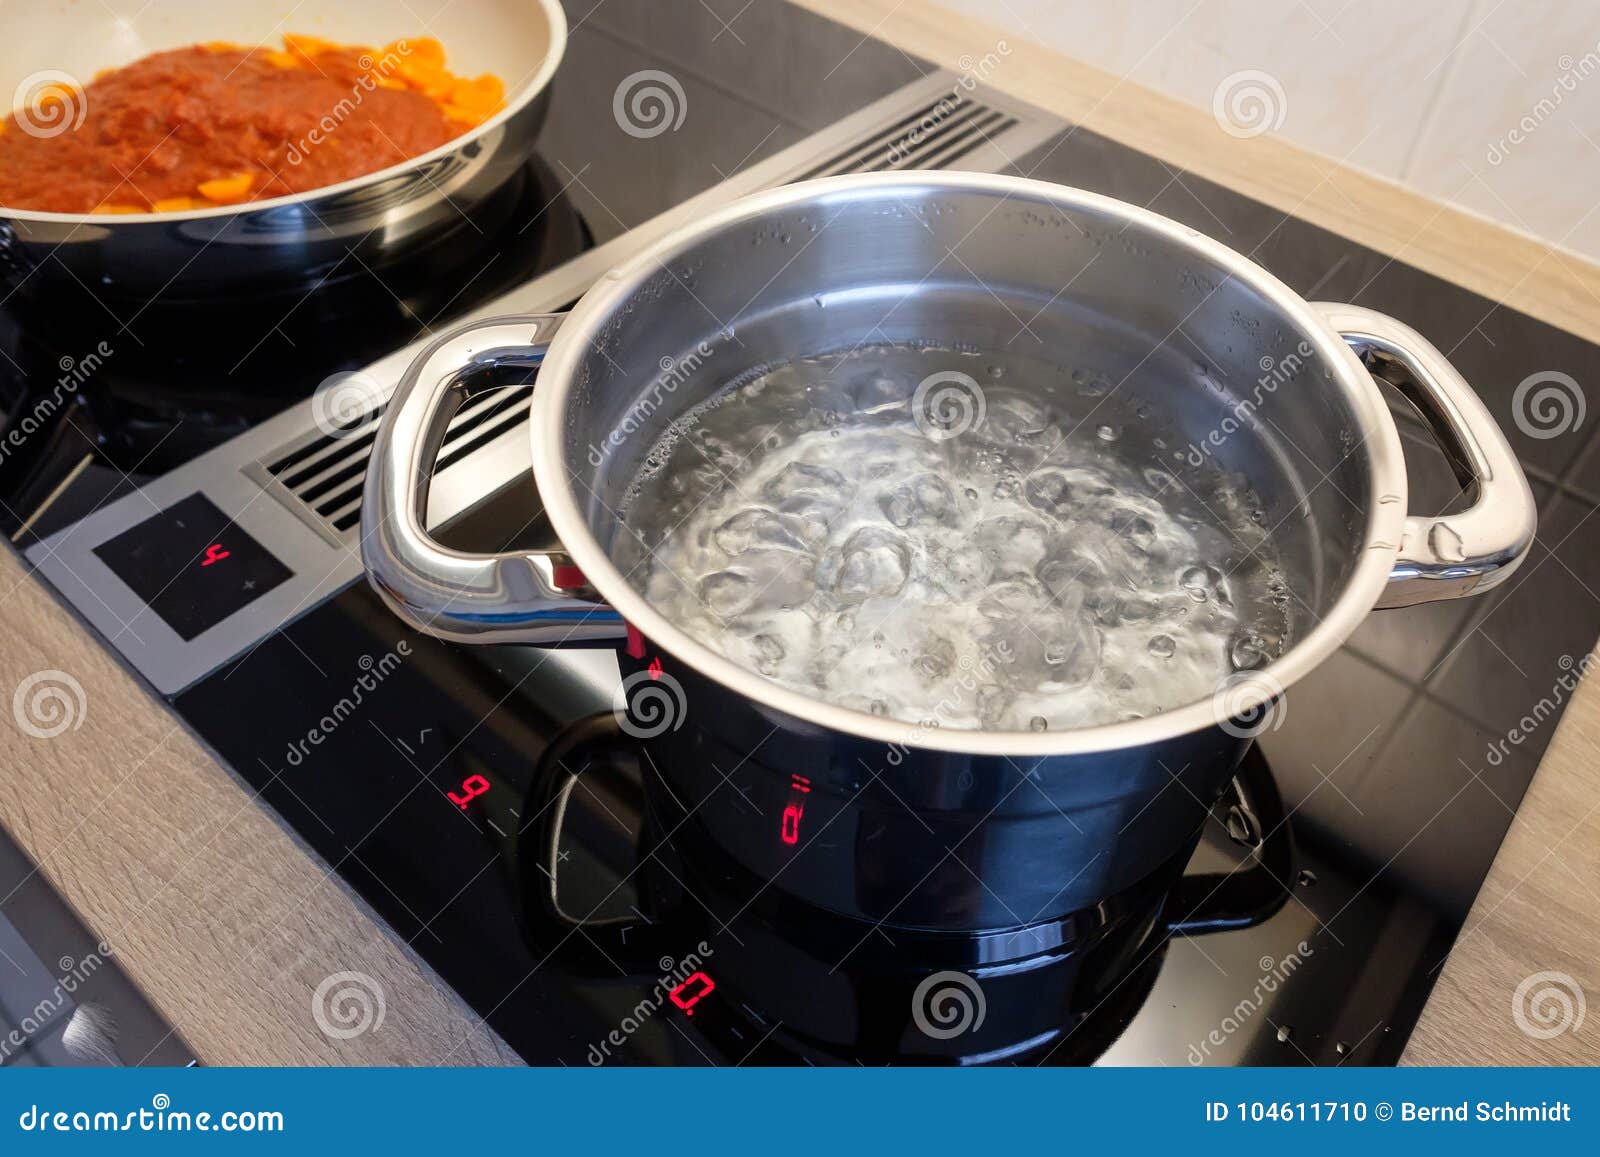 Water was boiled with Induction Pads on a Stovetop and this is what  happened! 